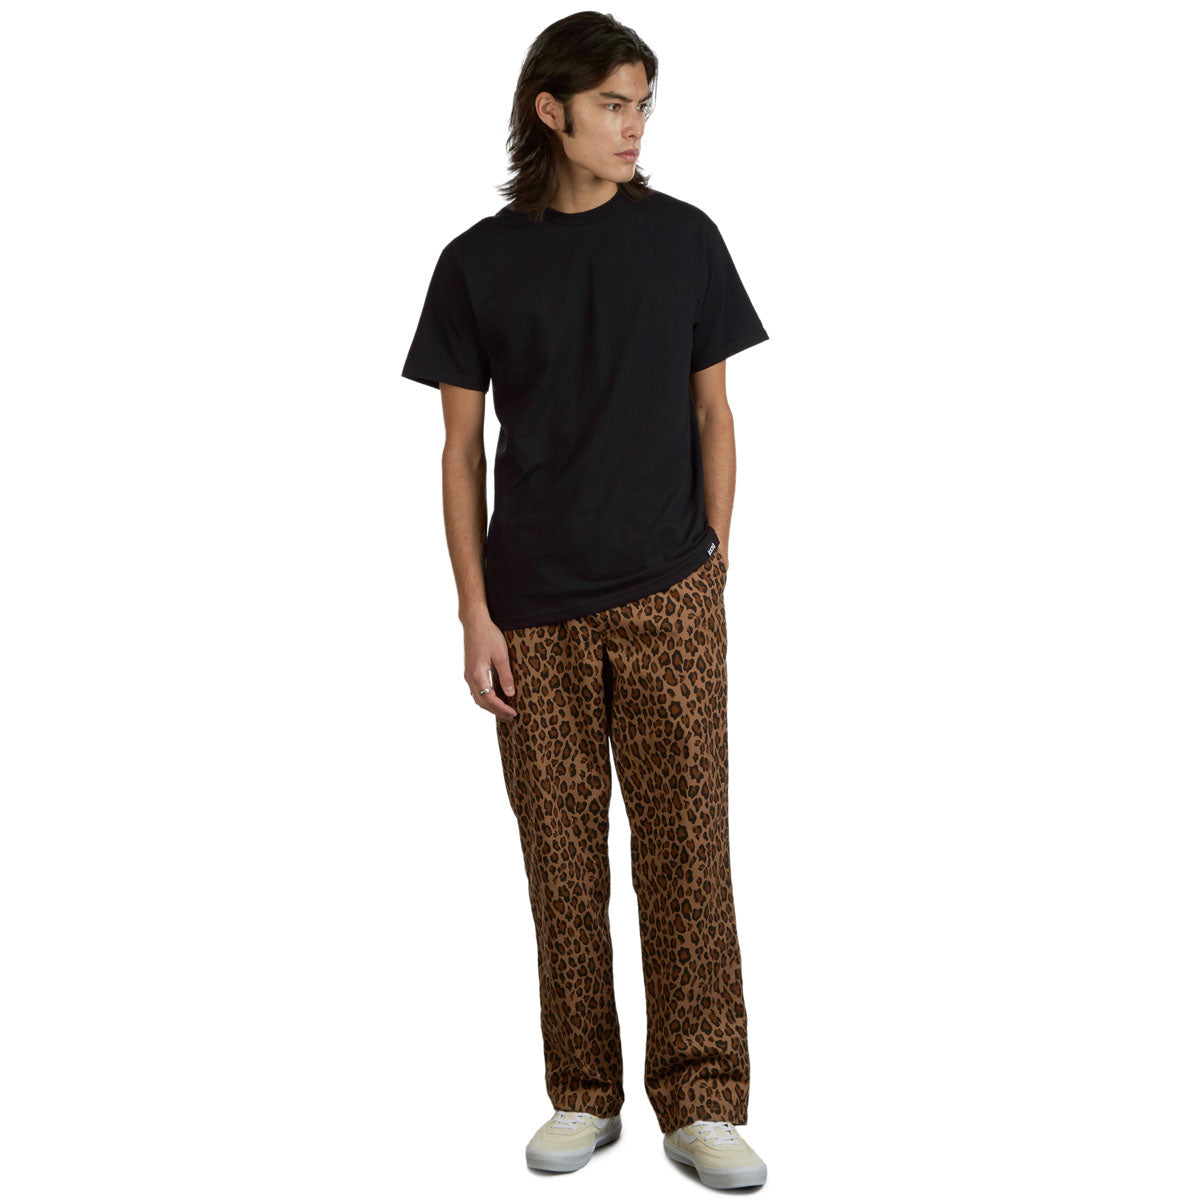 CCS Original Relaxed Chino Pants - Leopard image 2